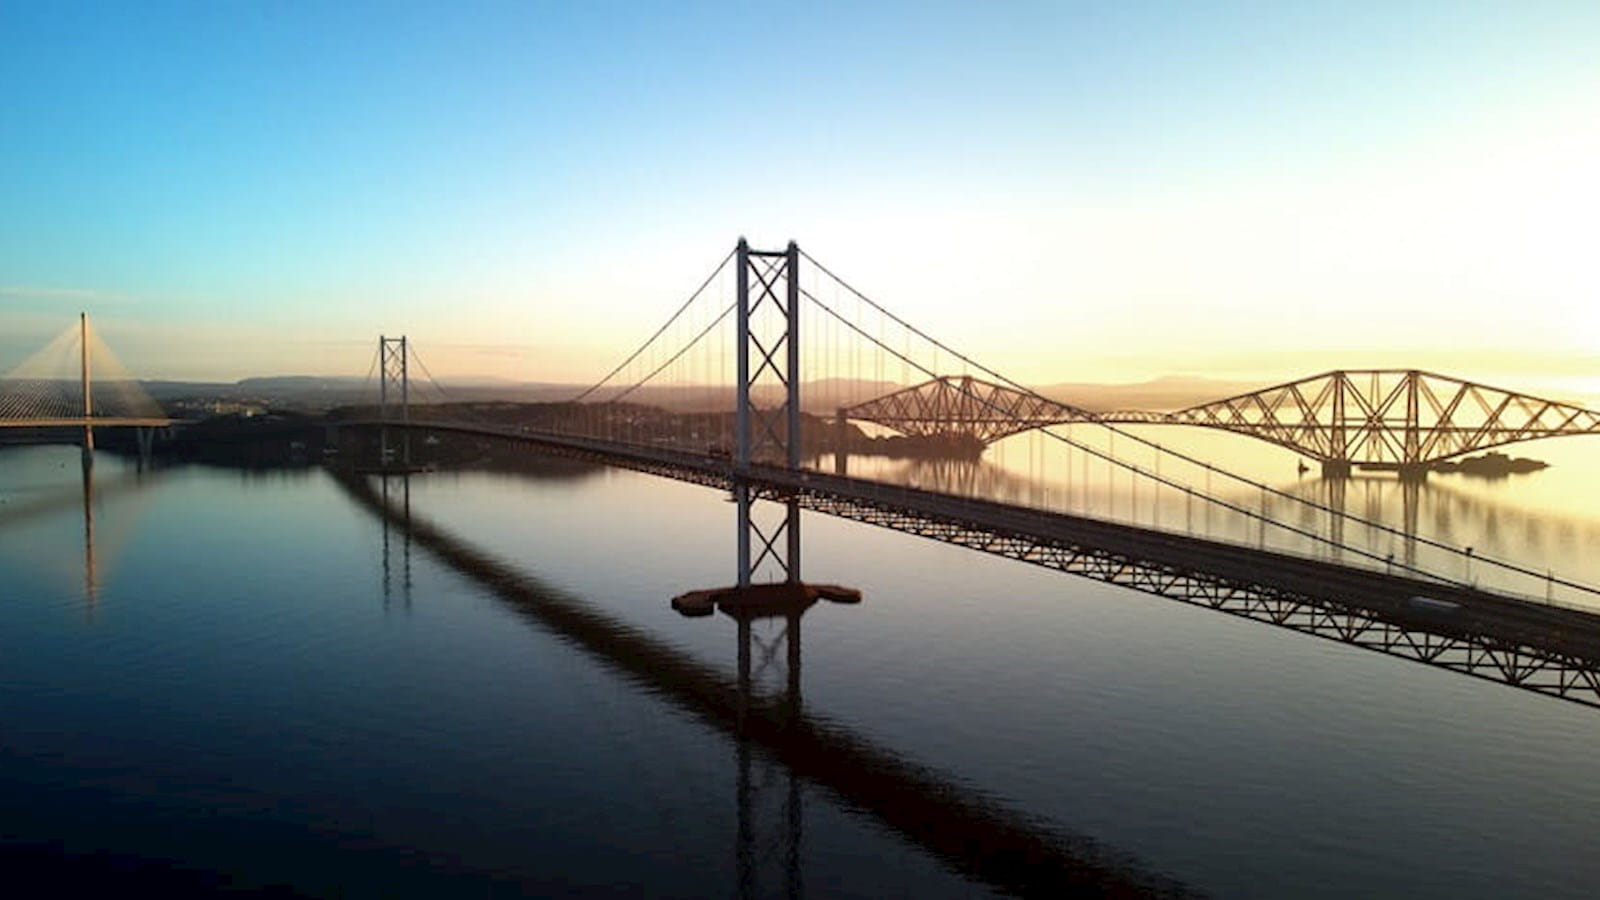 The Firth of Forth Bridge